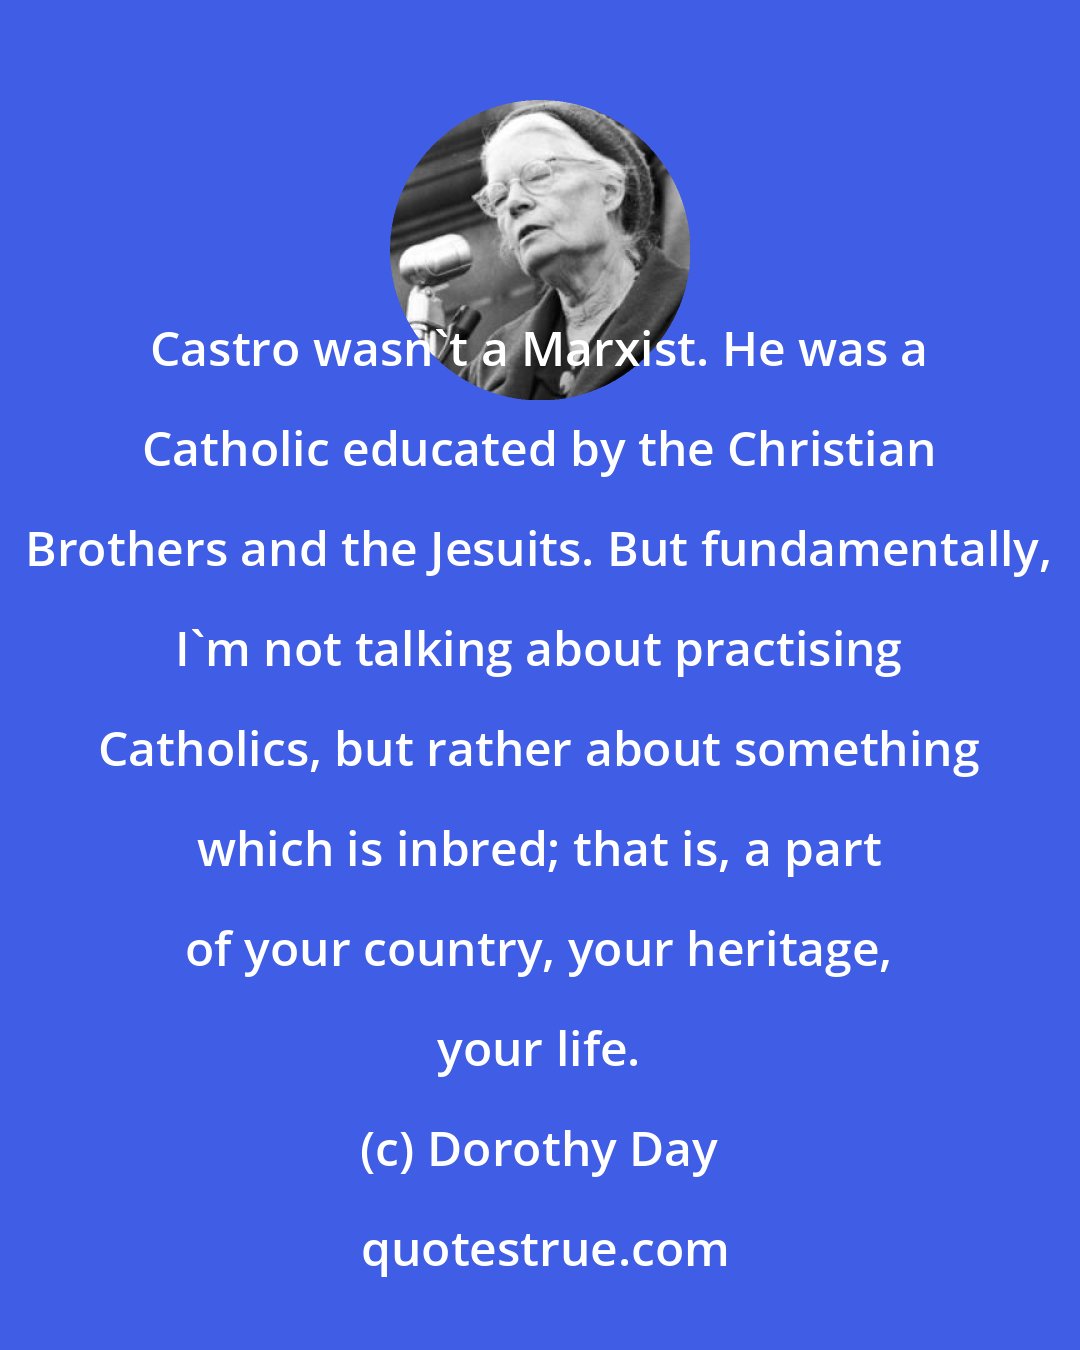 Dorothy Day: Castro wasn't a Marxist. He was a Catholic educated by the Christian Brothers and the Jesuits. But fundamentally, I'm not talking about practising Catholics, but rather about something which is inbred; that is, a part of your country, your heritage, your life.